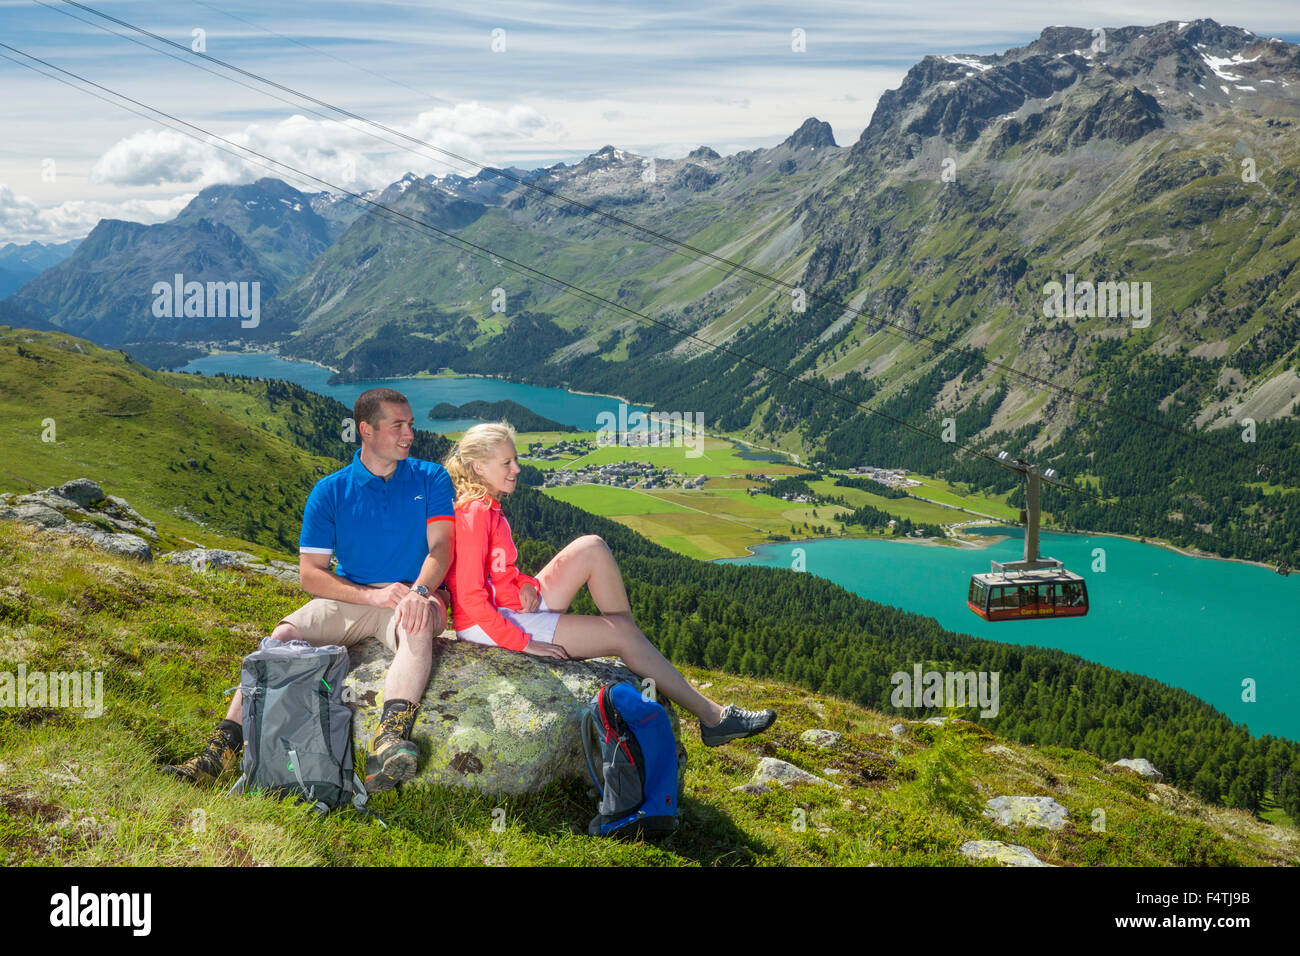 Hiking in Corvatsch in Upper Engadine, Stock Photo